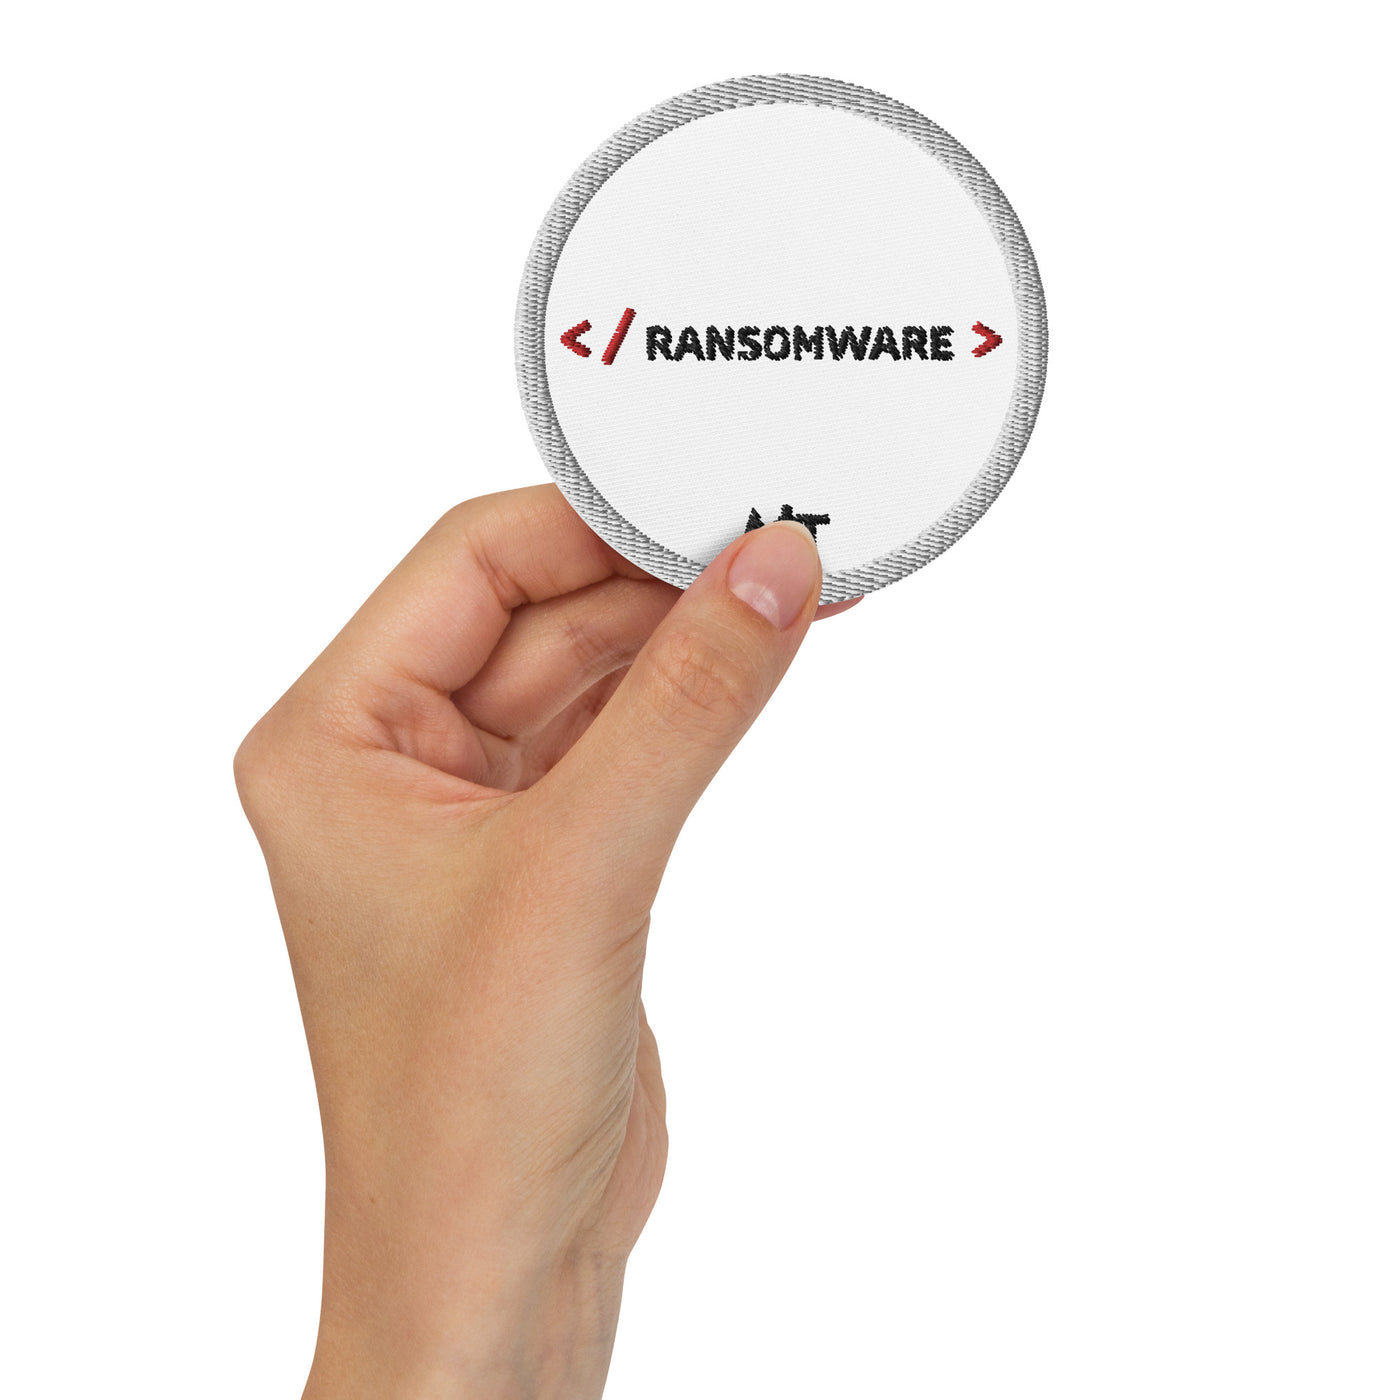 Ransomware - Embroidered patches